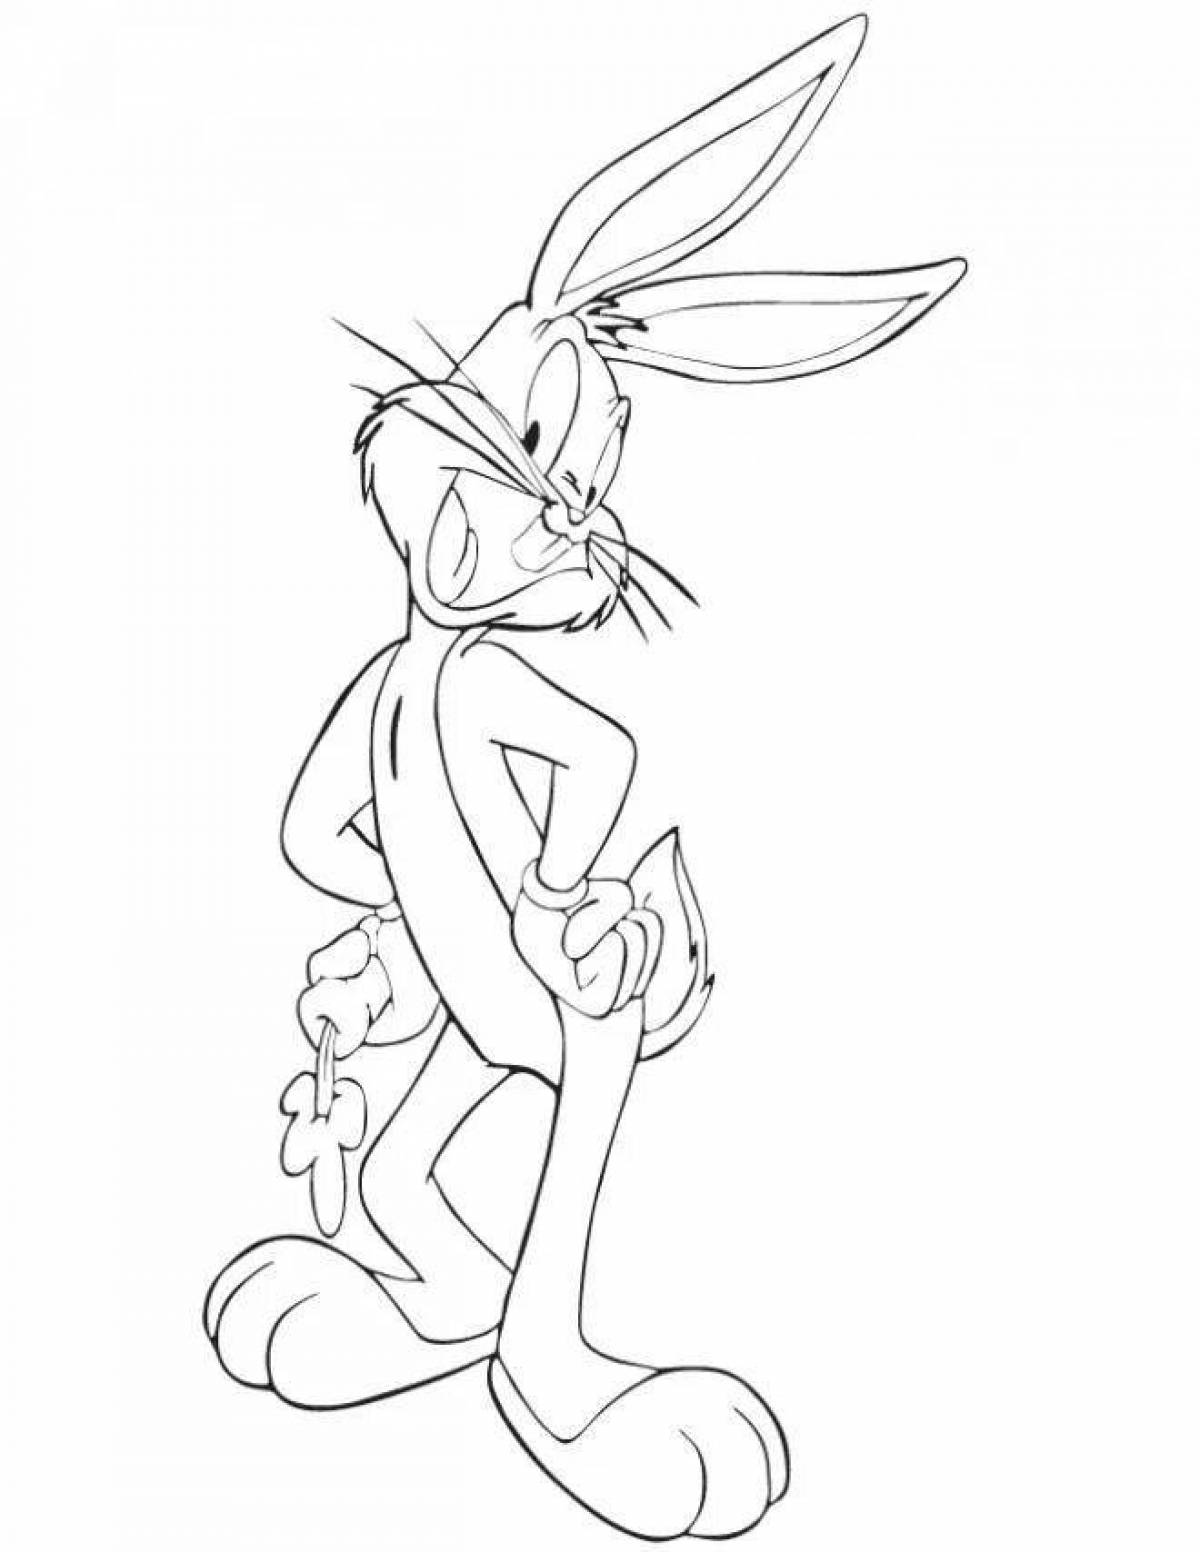 Bugs Bunny bright coloring